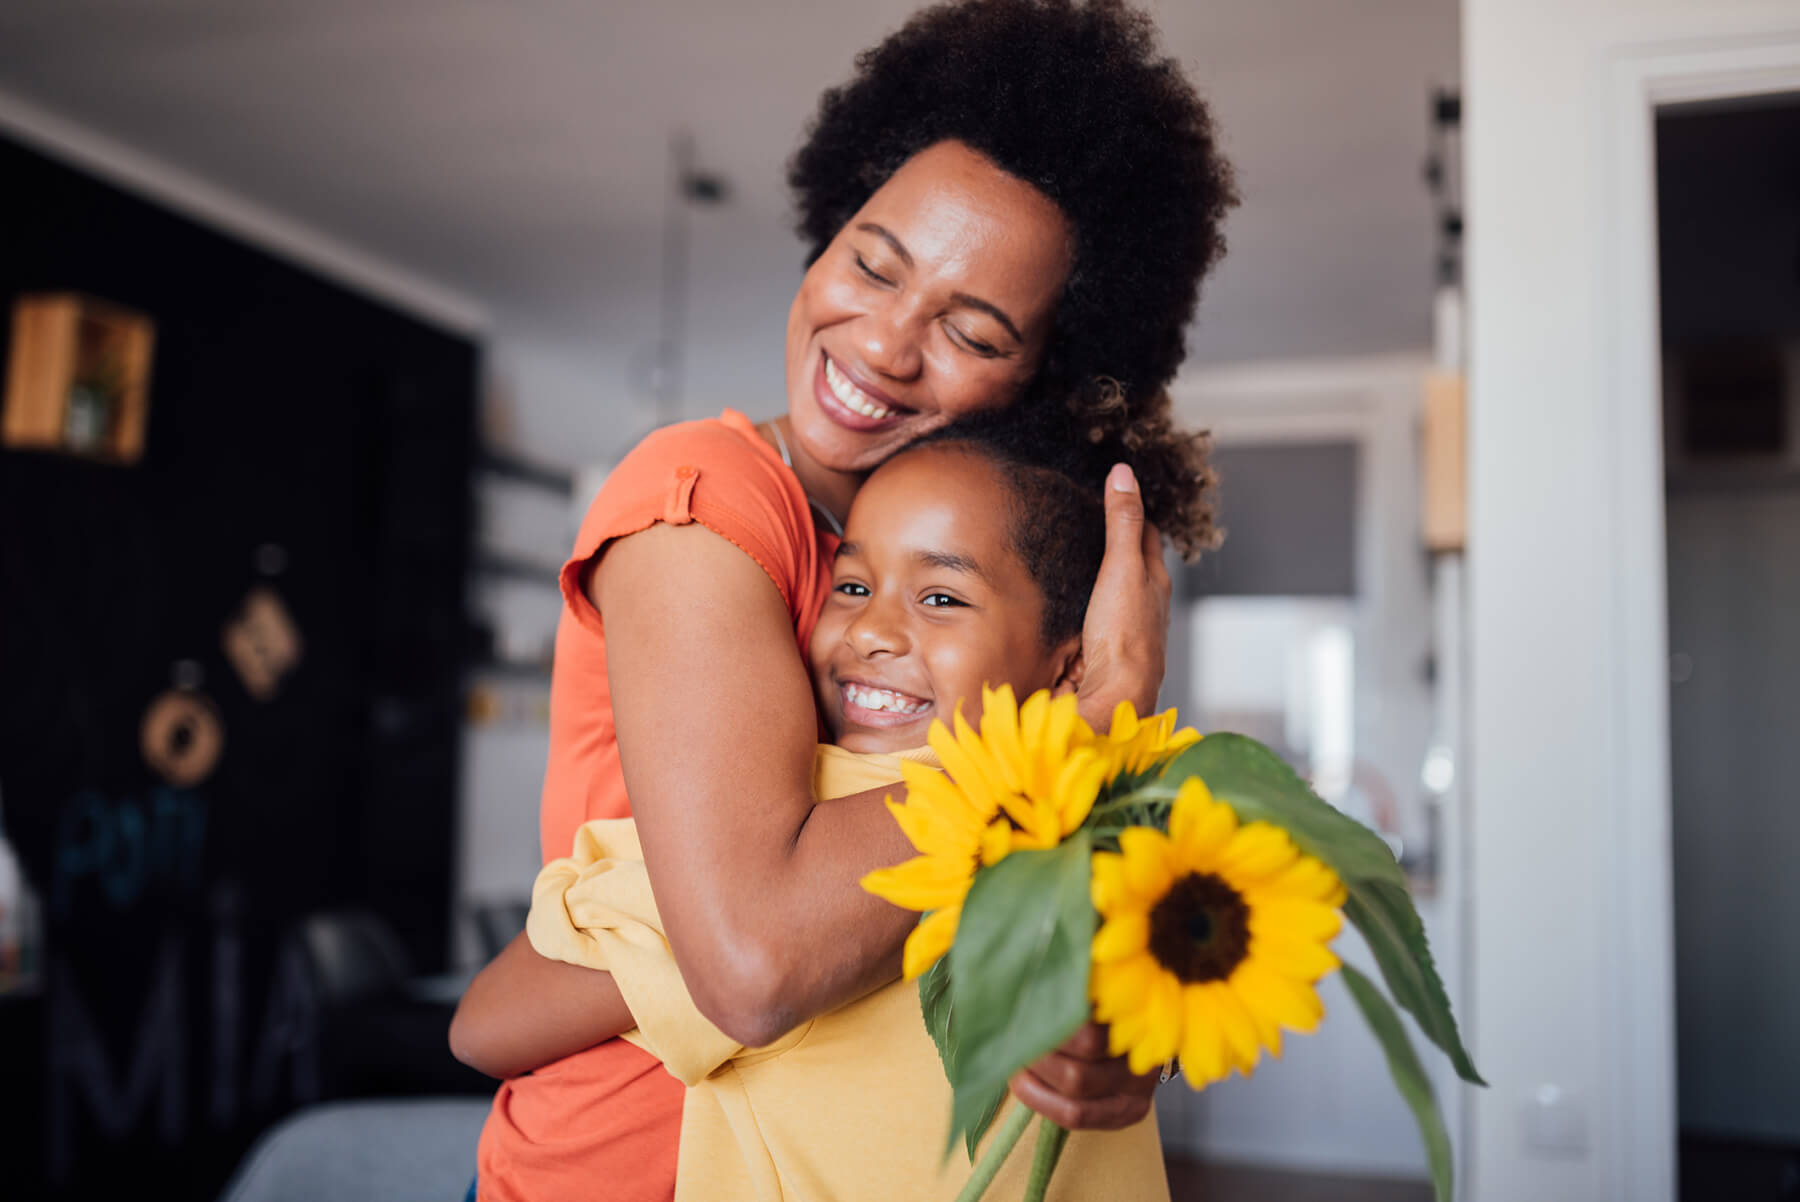 A mother and daughter embrace, holding sunflowers